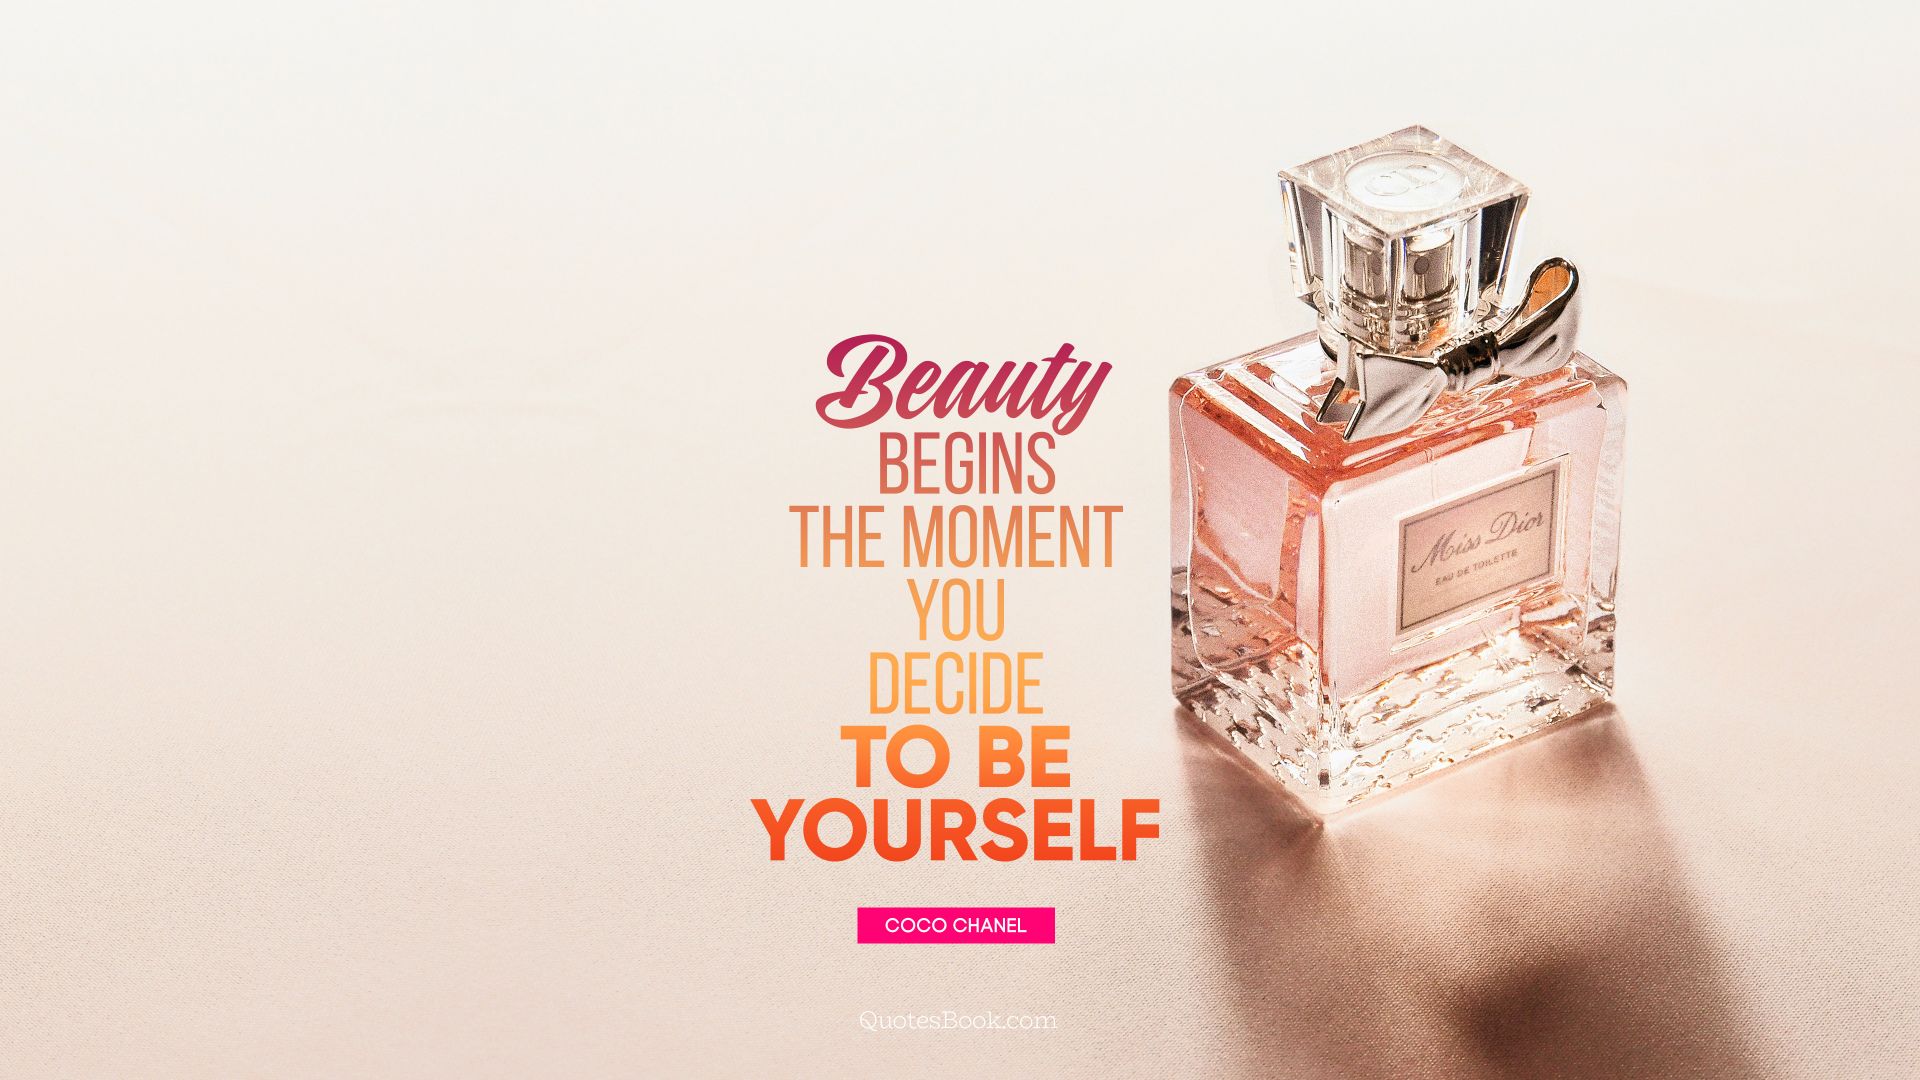 Beauty begins the moment you decide to be yourself. - Quote by Coco Chanel